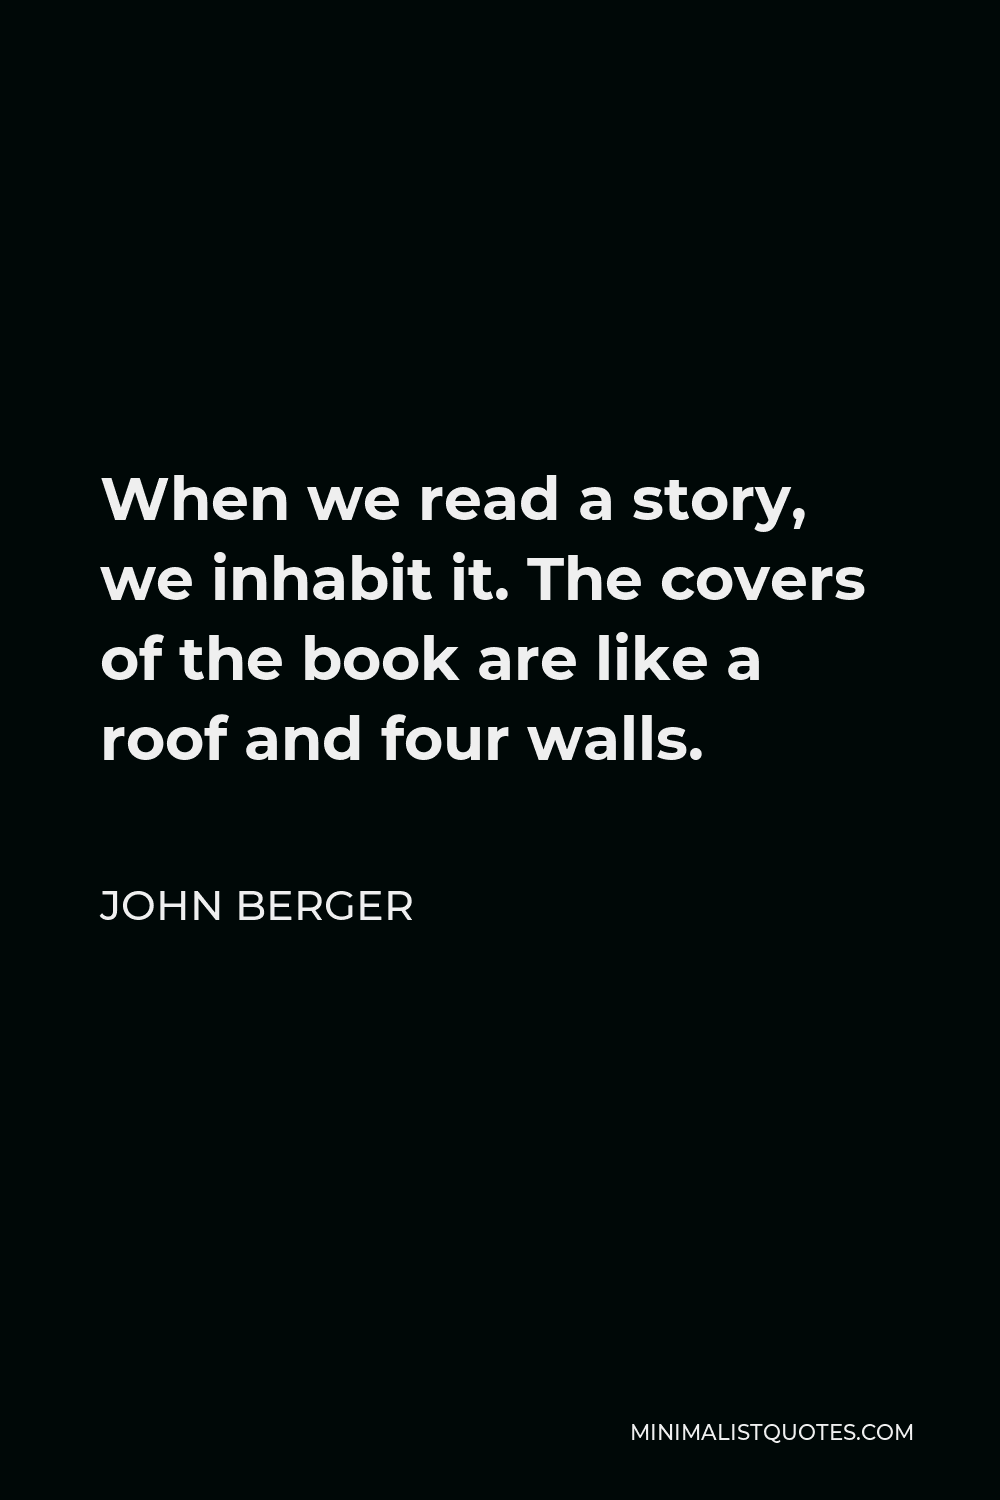 John Berger Quote - When we read a story, we inhabit it. The covers of the book are like a roof and four walls.